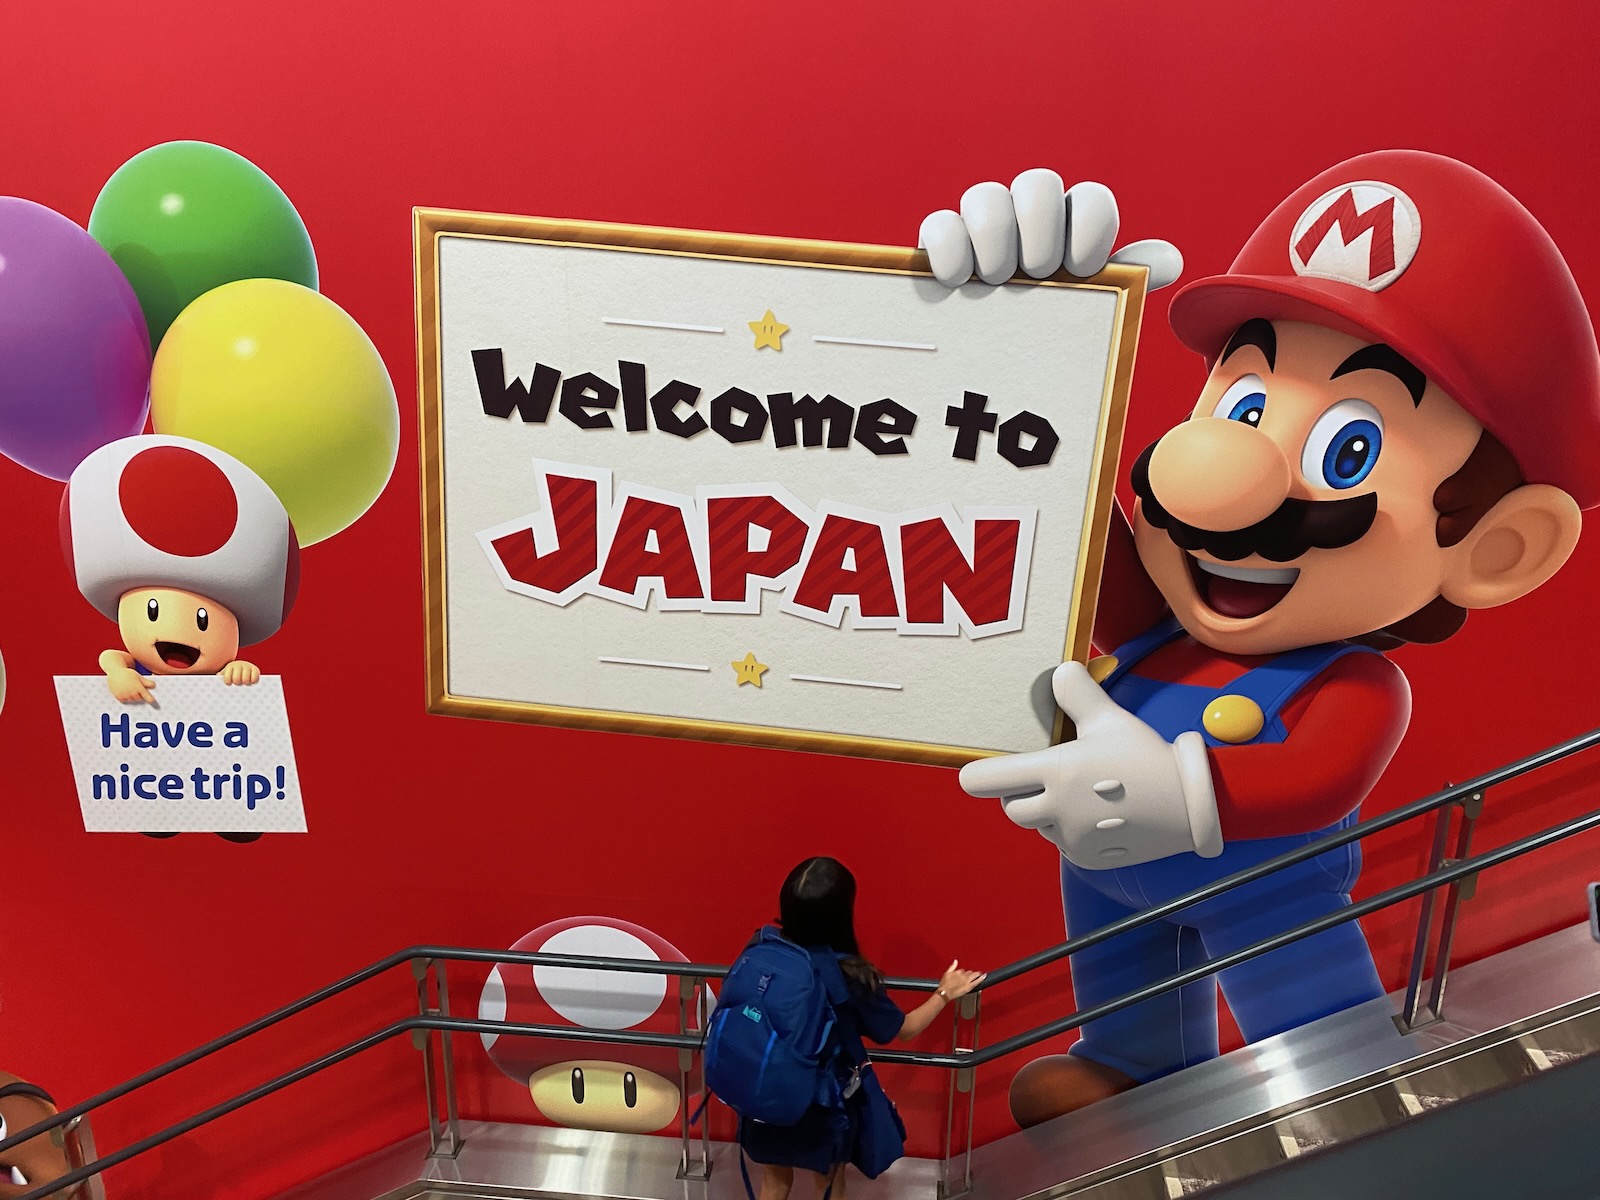 Characters from Nintendo’s Super Mario video game series hold up signs welcoming travelers to Japan.